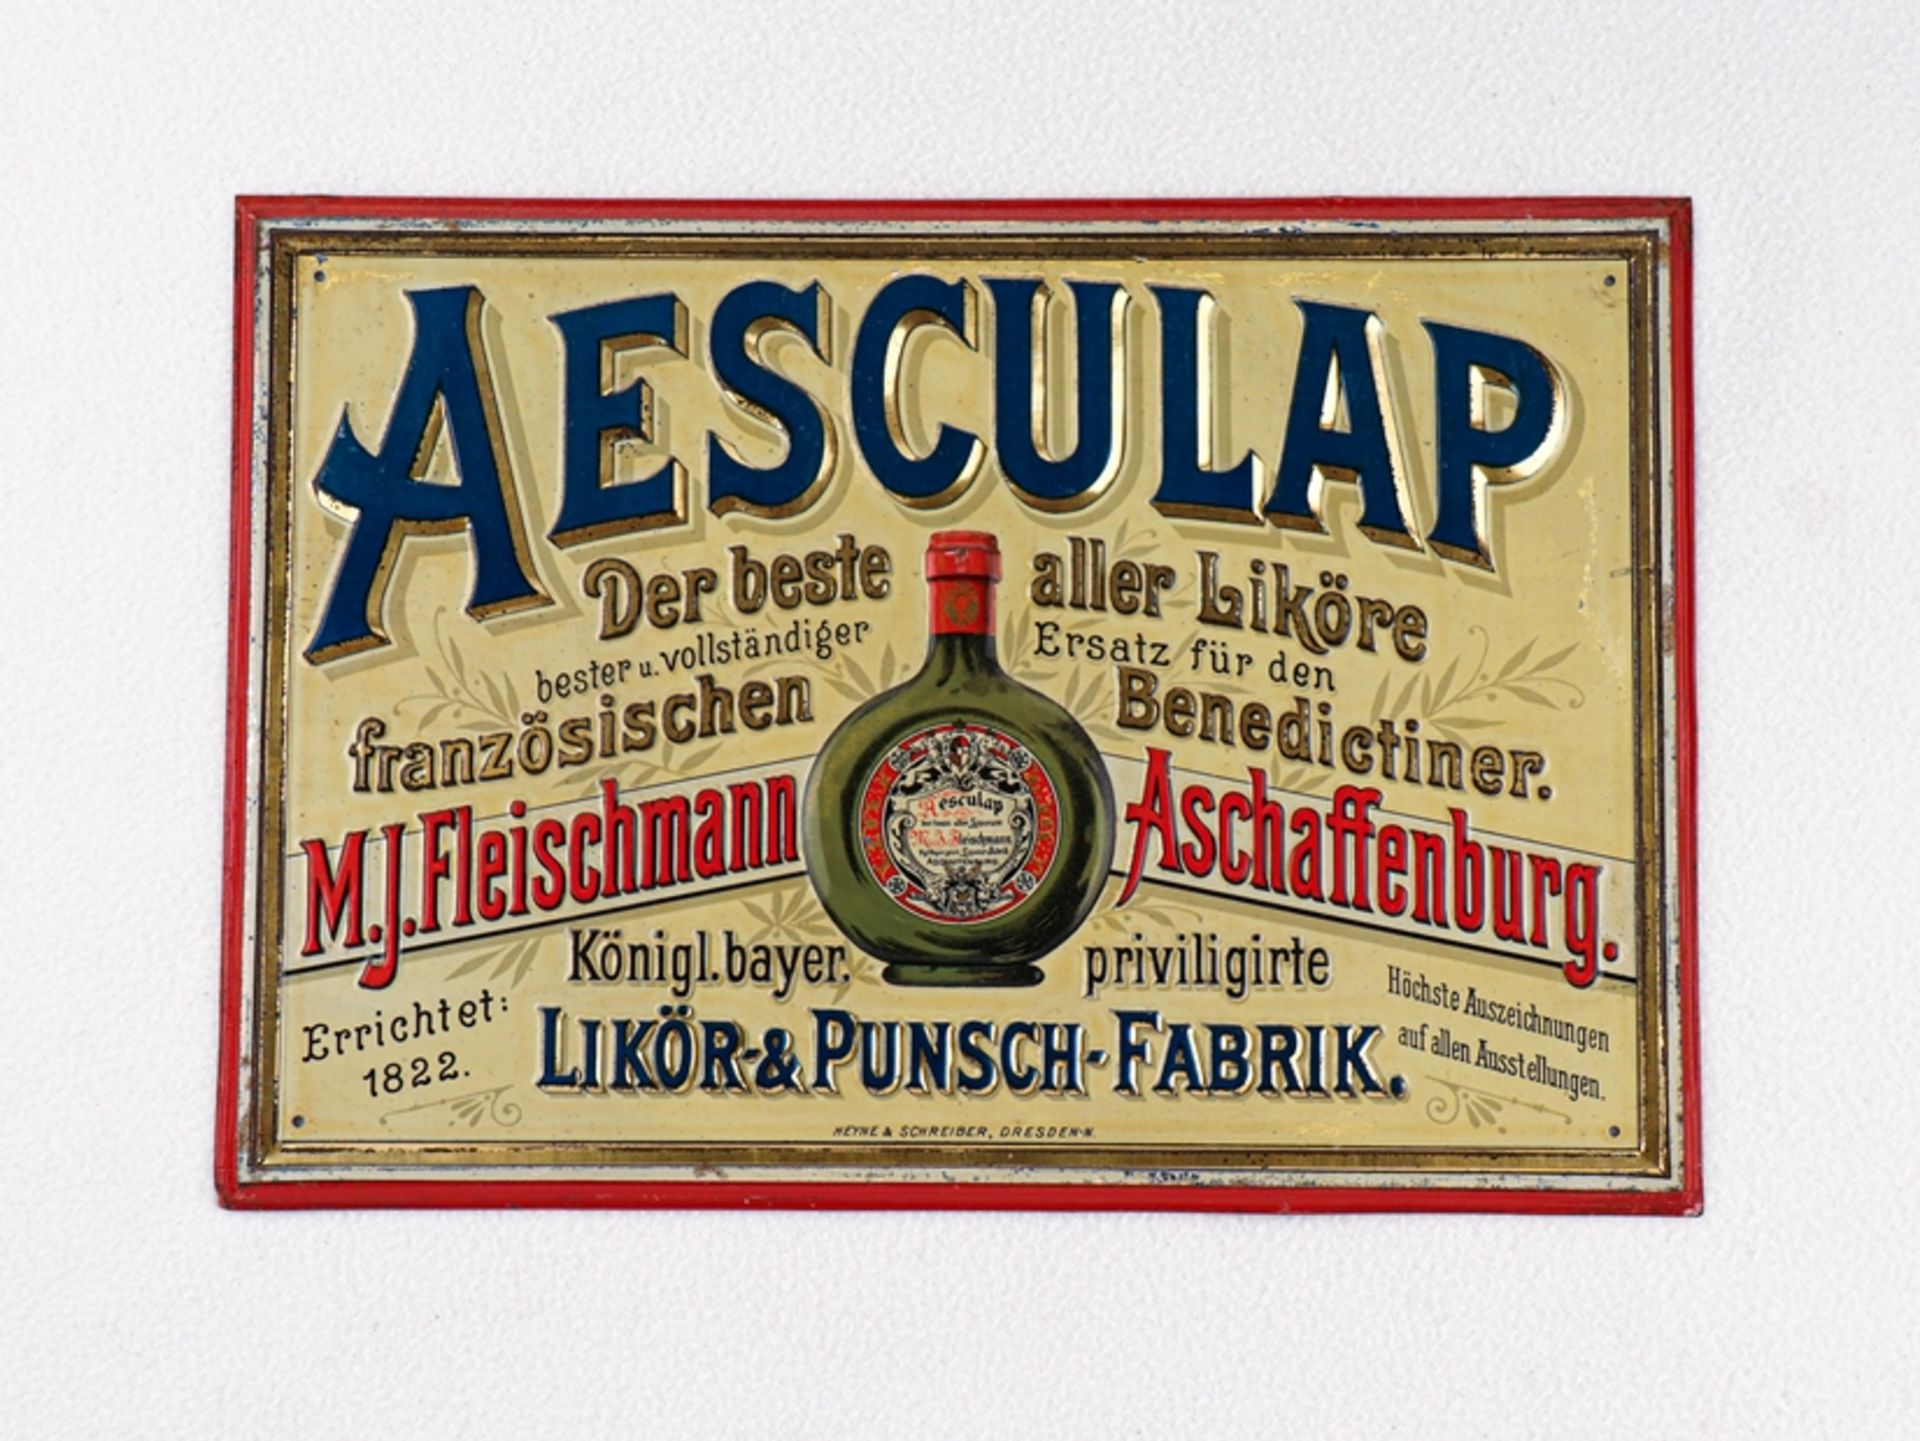 Tin sign Aesculap, the best of all liqueurs, Aschaffenburg, around 1900 - Image 3 of 3